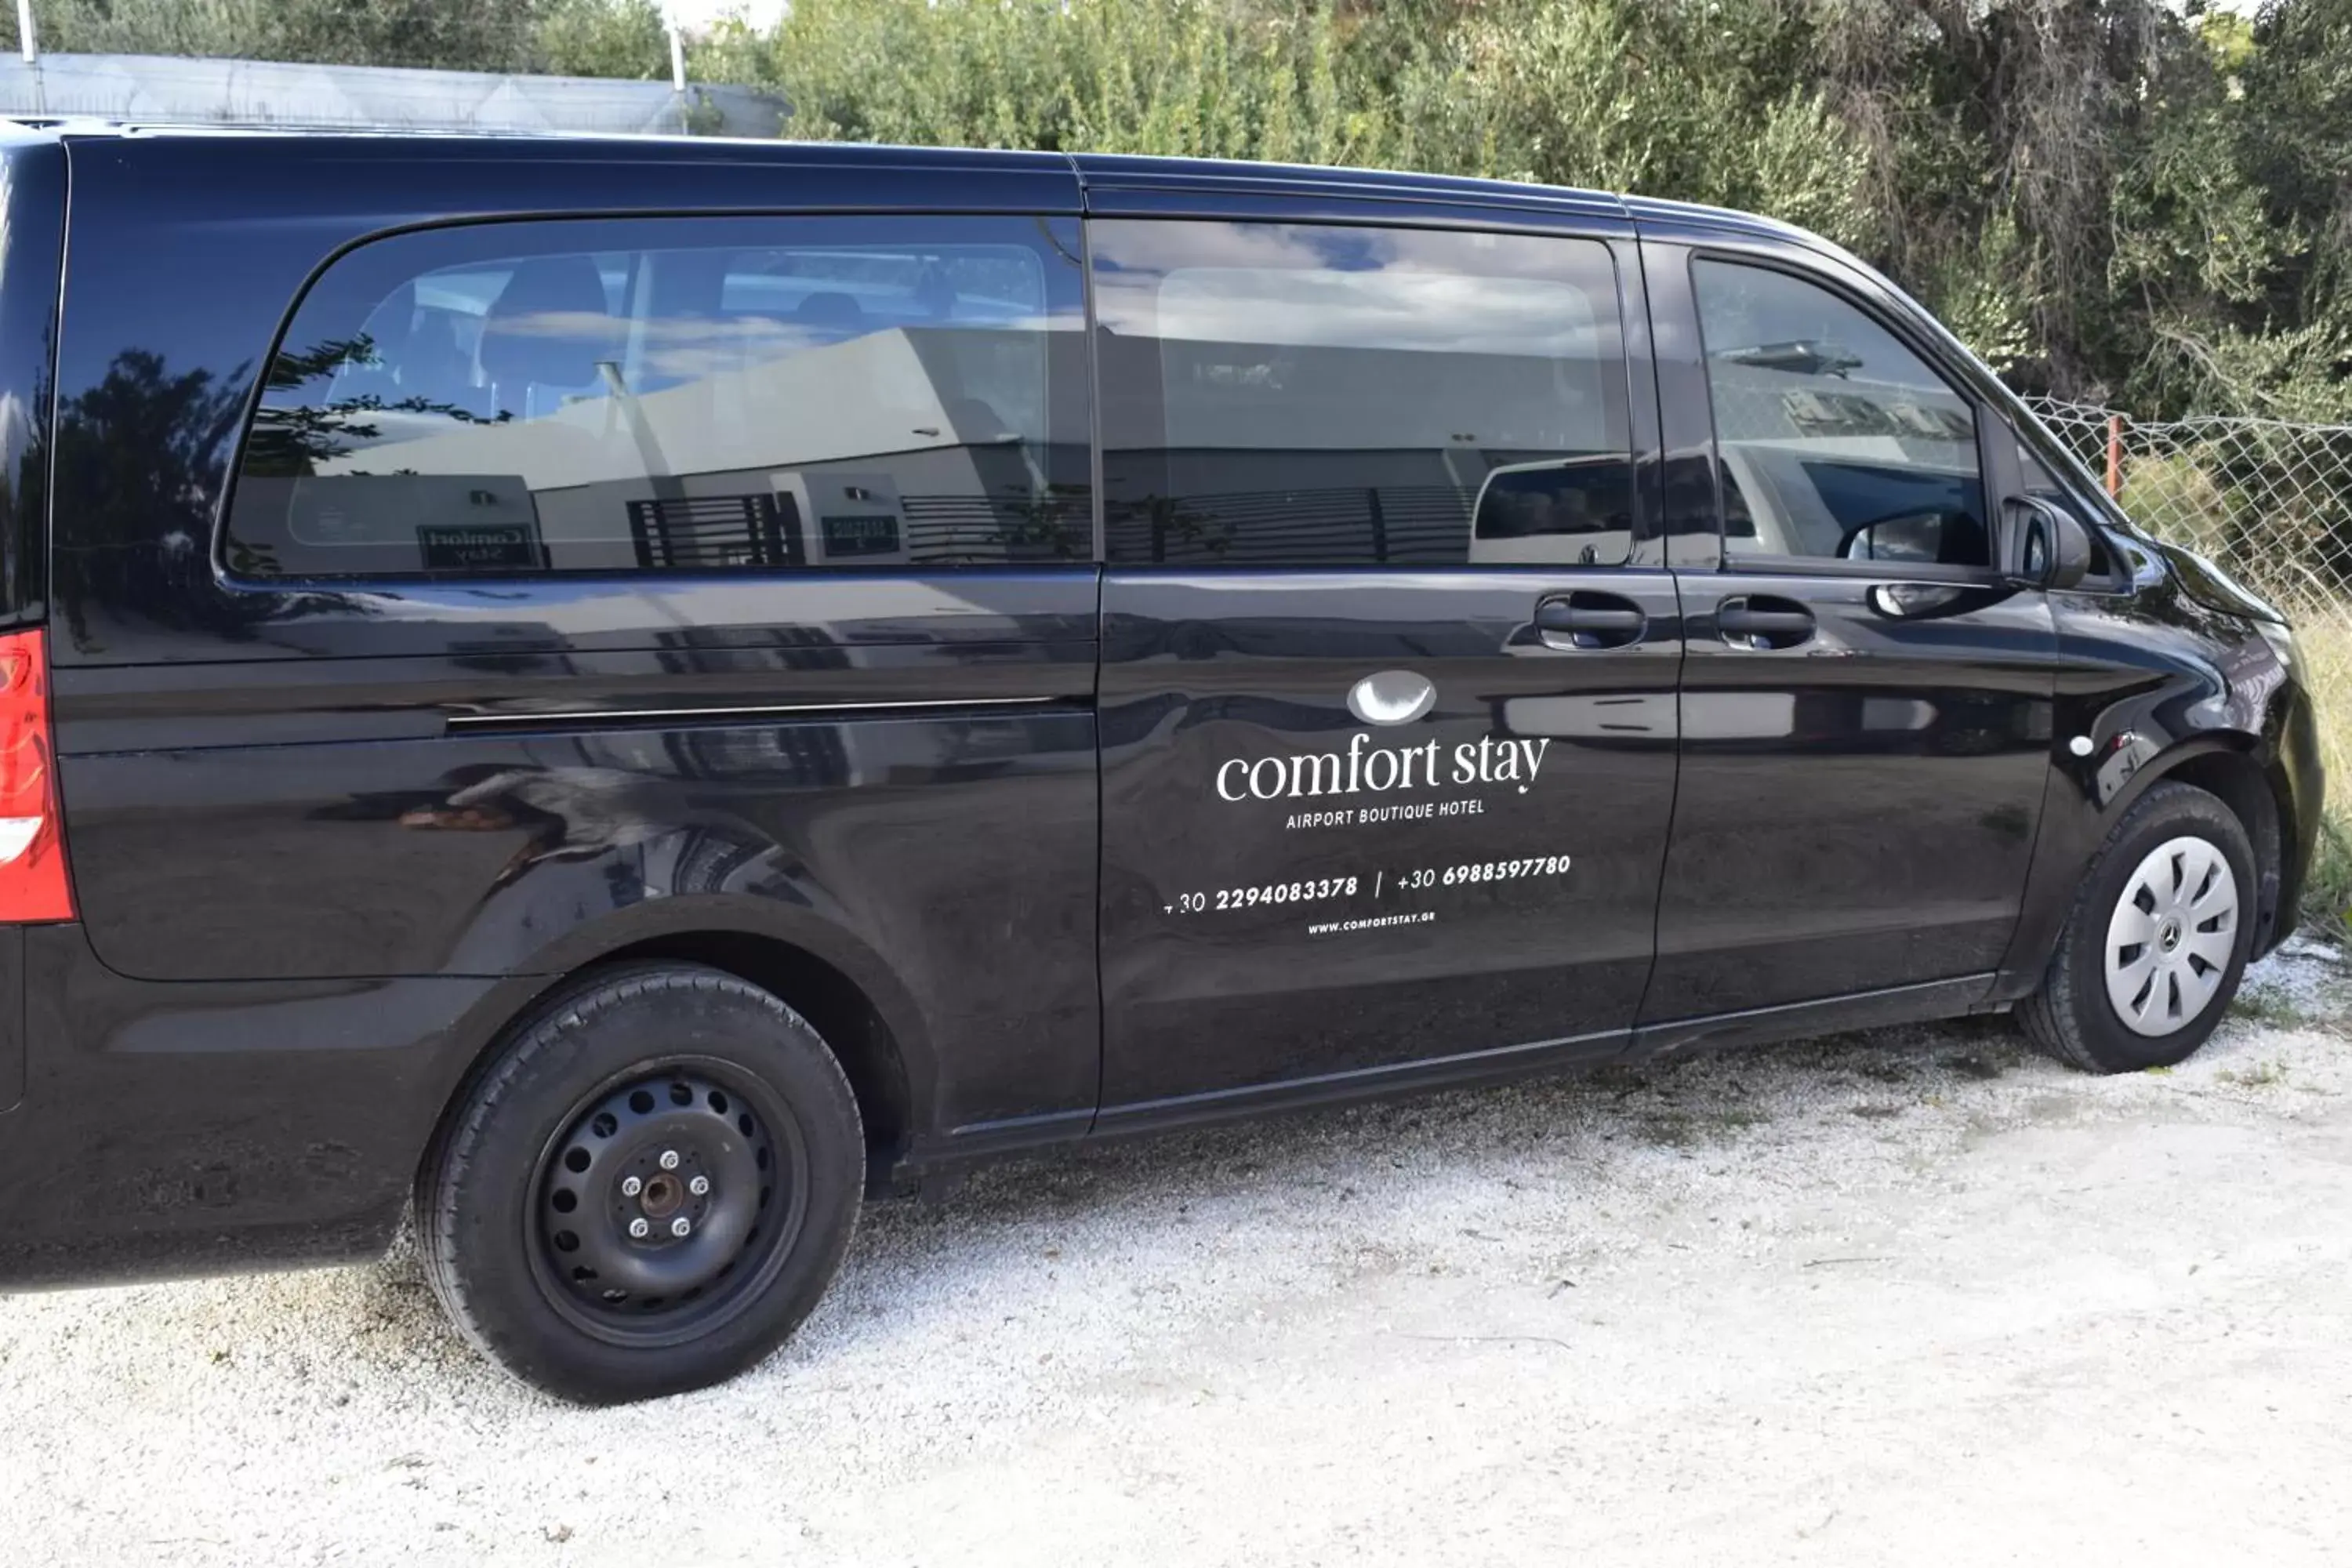 Comfort Stay Airport Studios - FREE shuttle from the Athens airport